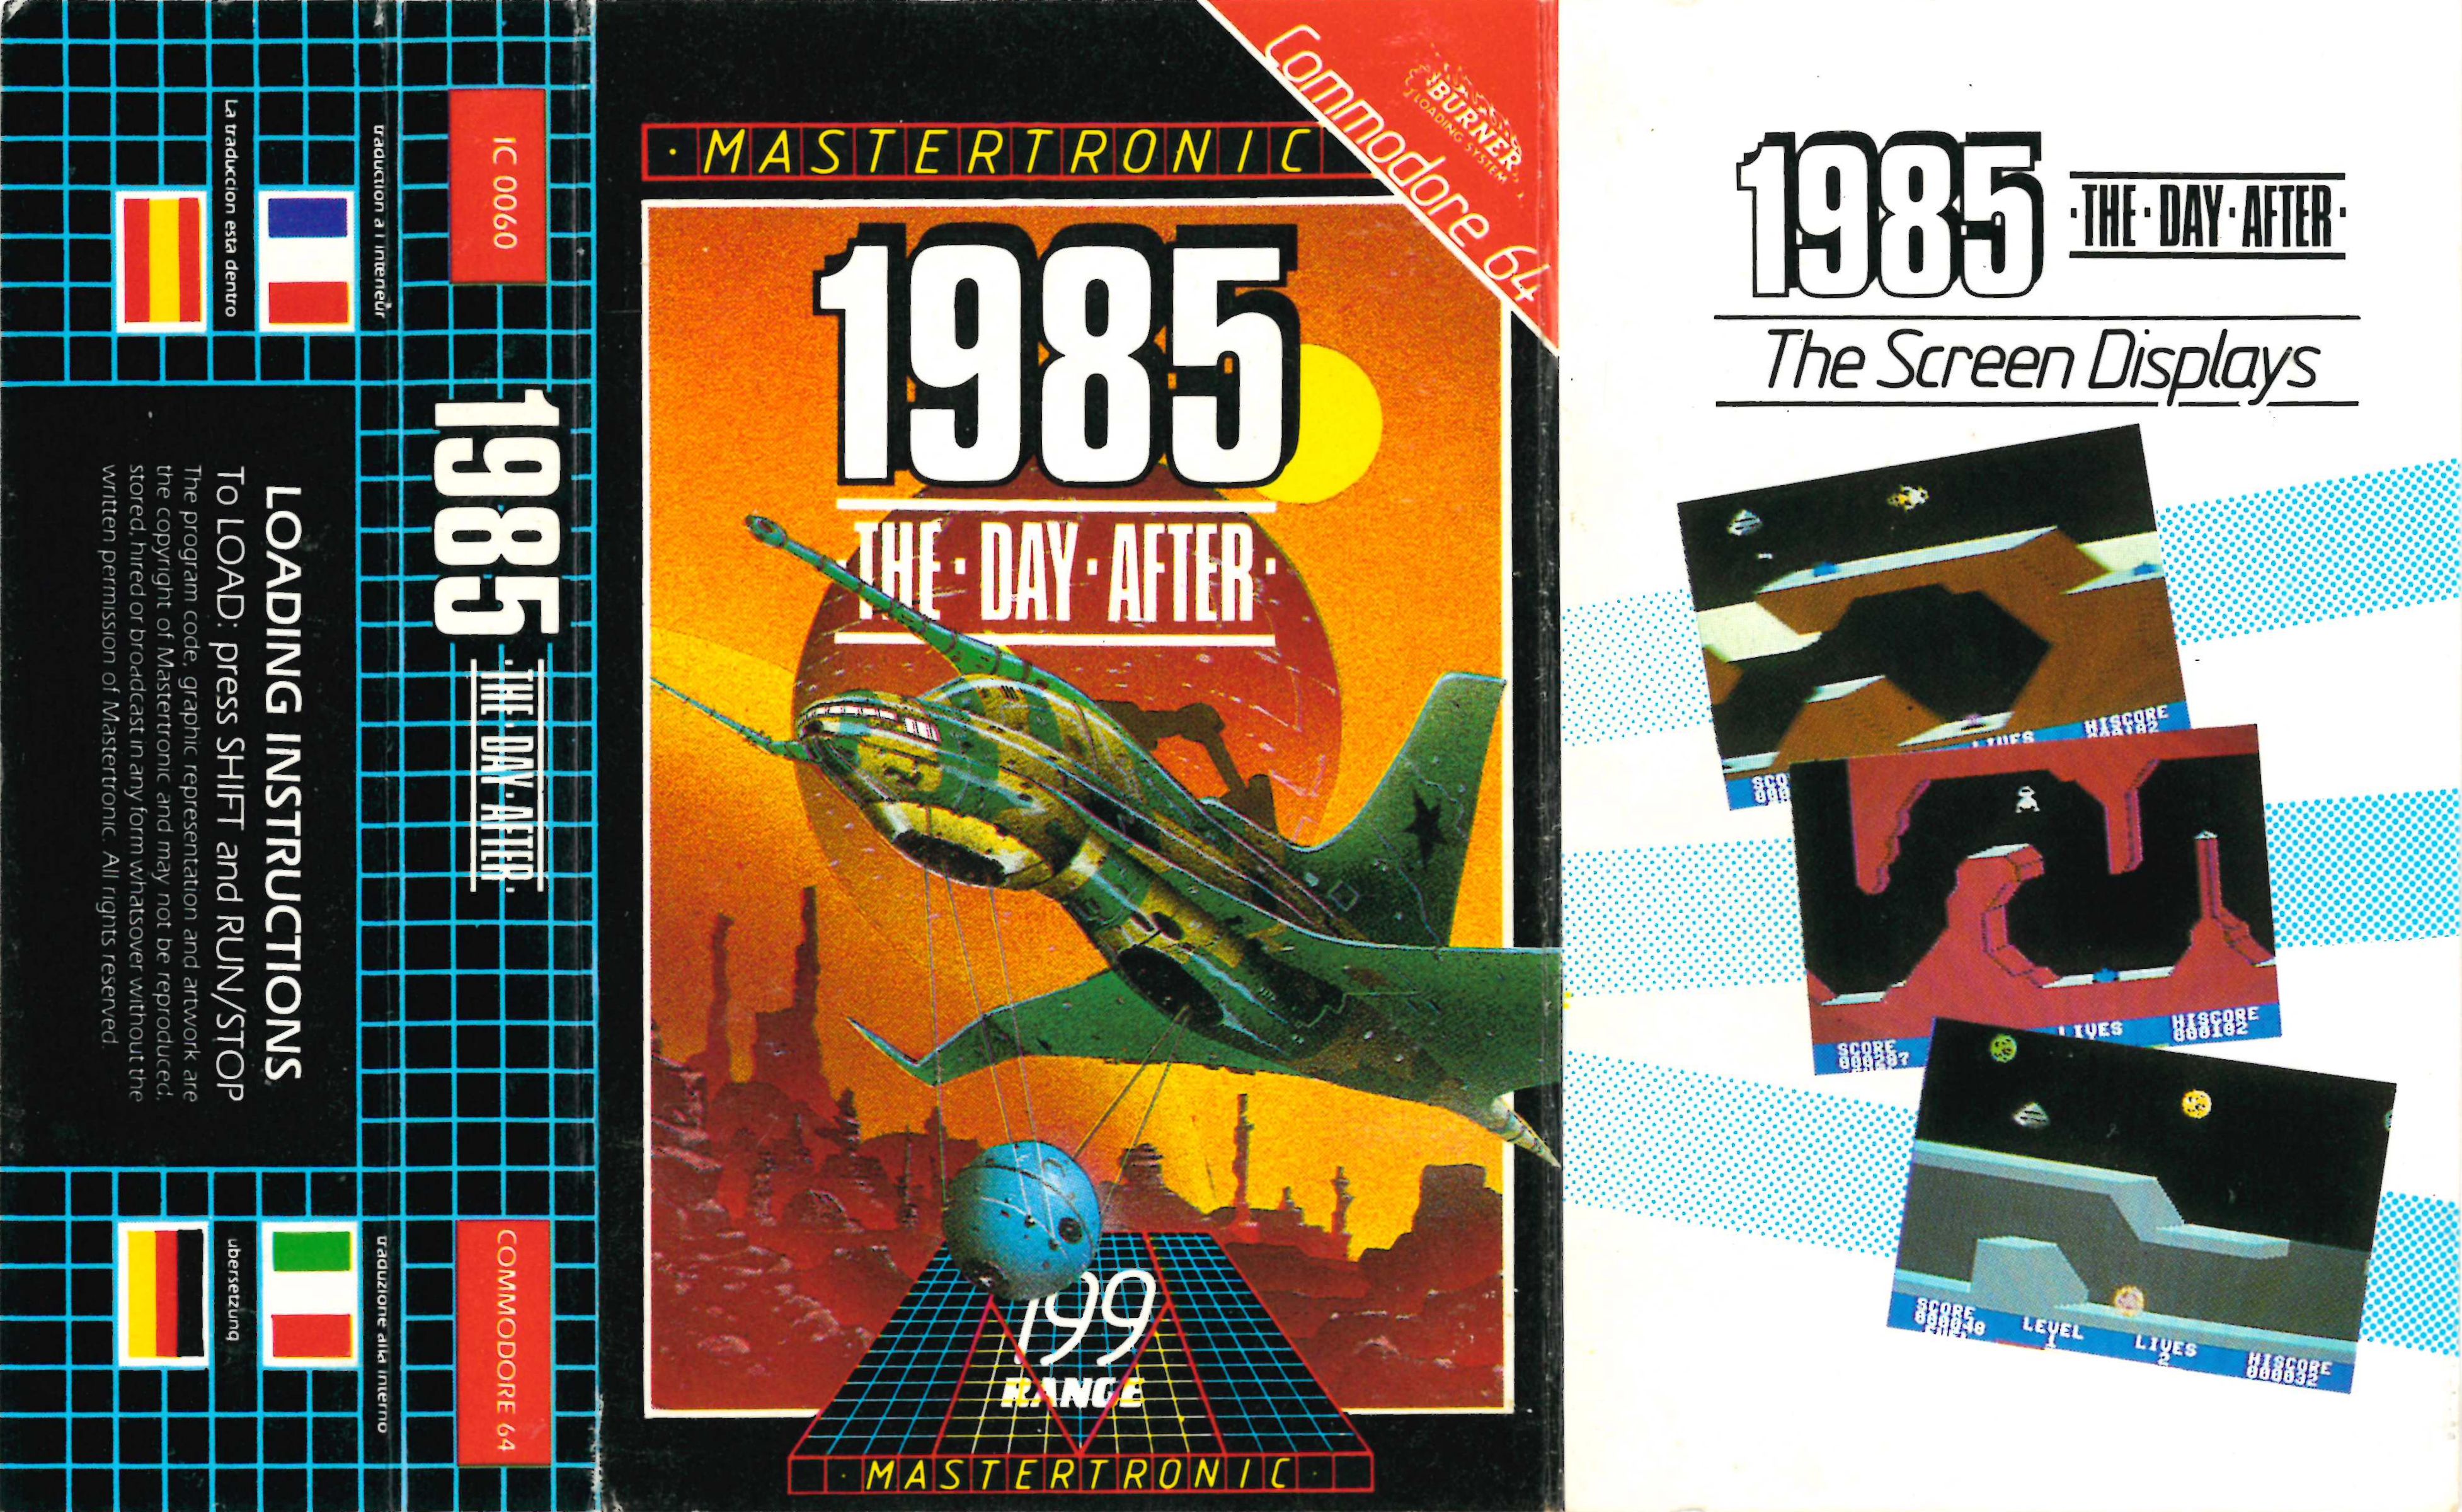 Captain's Blog: Game Covers - Game Crazy (Commodore 64)